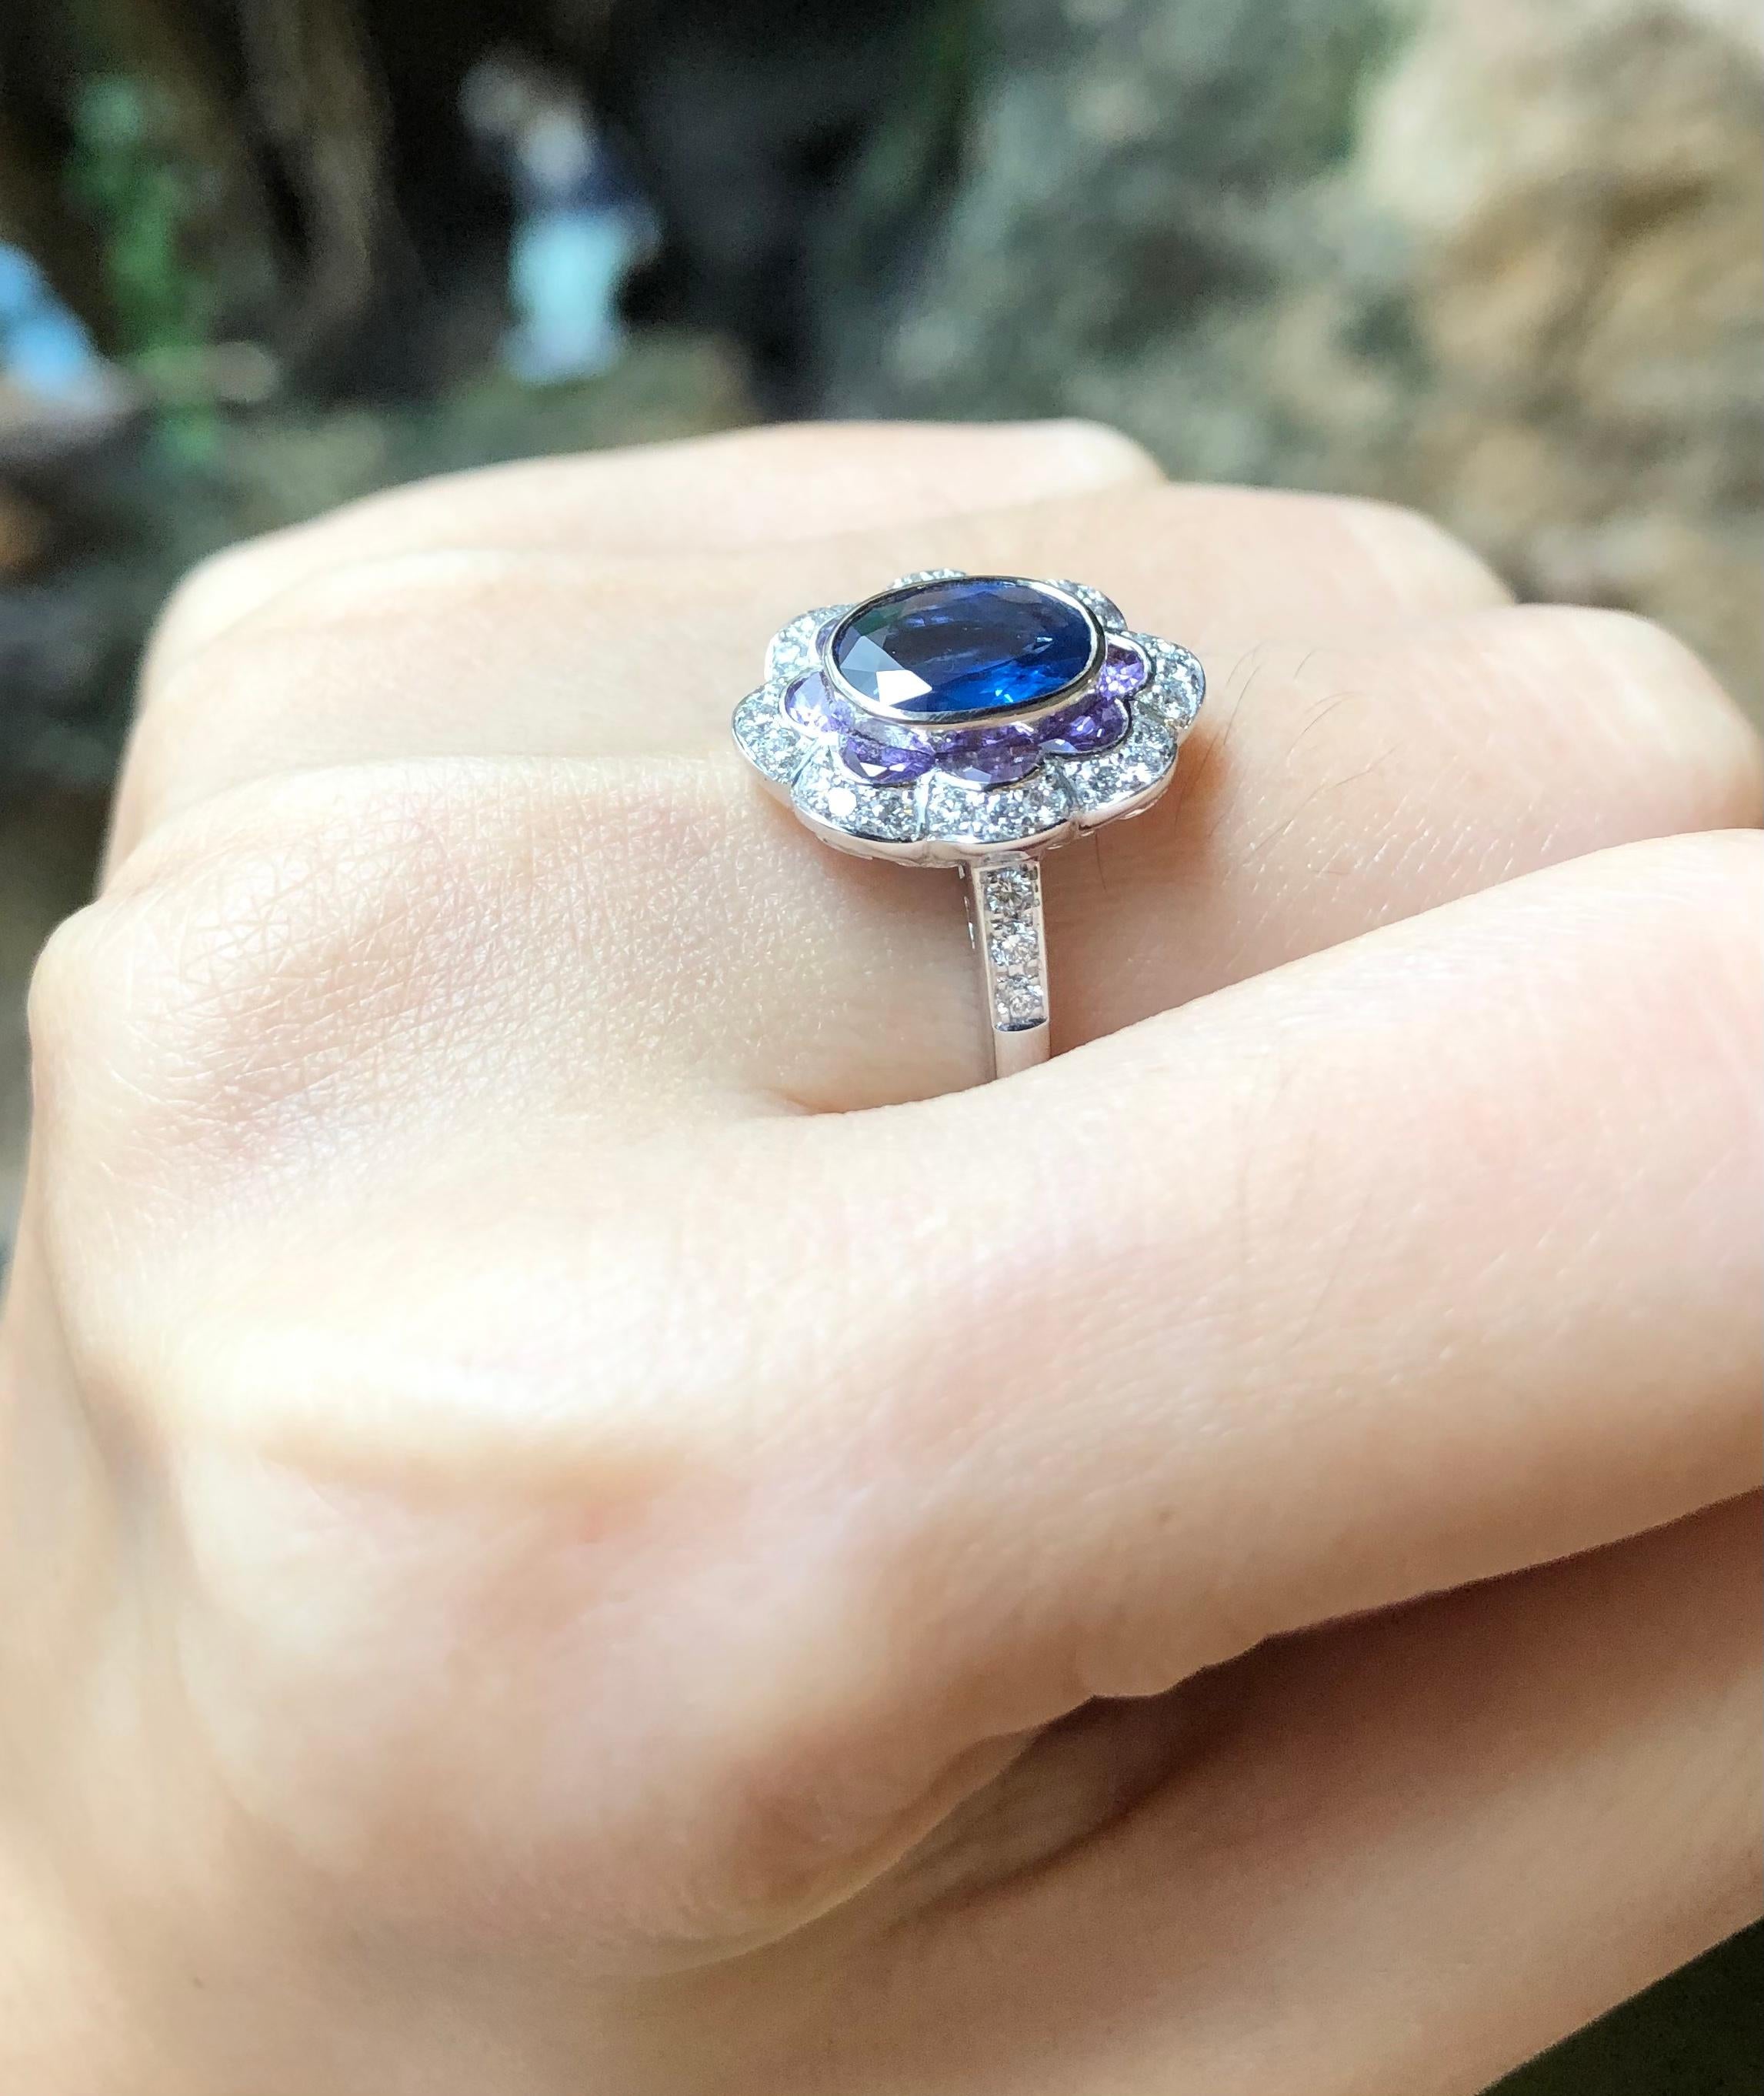 Blue Sapphire 1.75 carats with Purple Sapphire 2.30 carats and Diamond 0.36 carat Ring set in 18 Karat White Gold Settings

Width:  1.2 cm 
Length: 1.6 cm
Ring Size: 53
Total Weight: 5.56 grams

